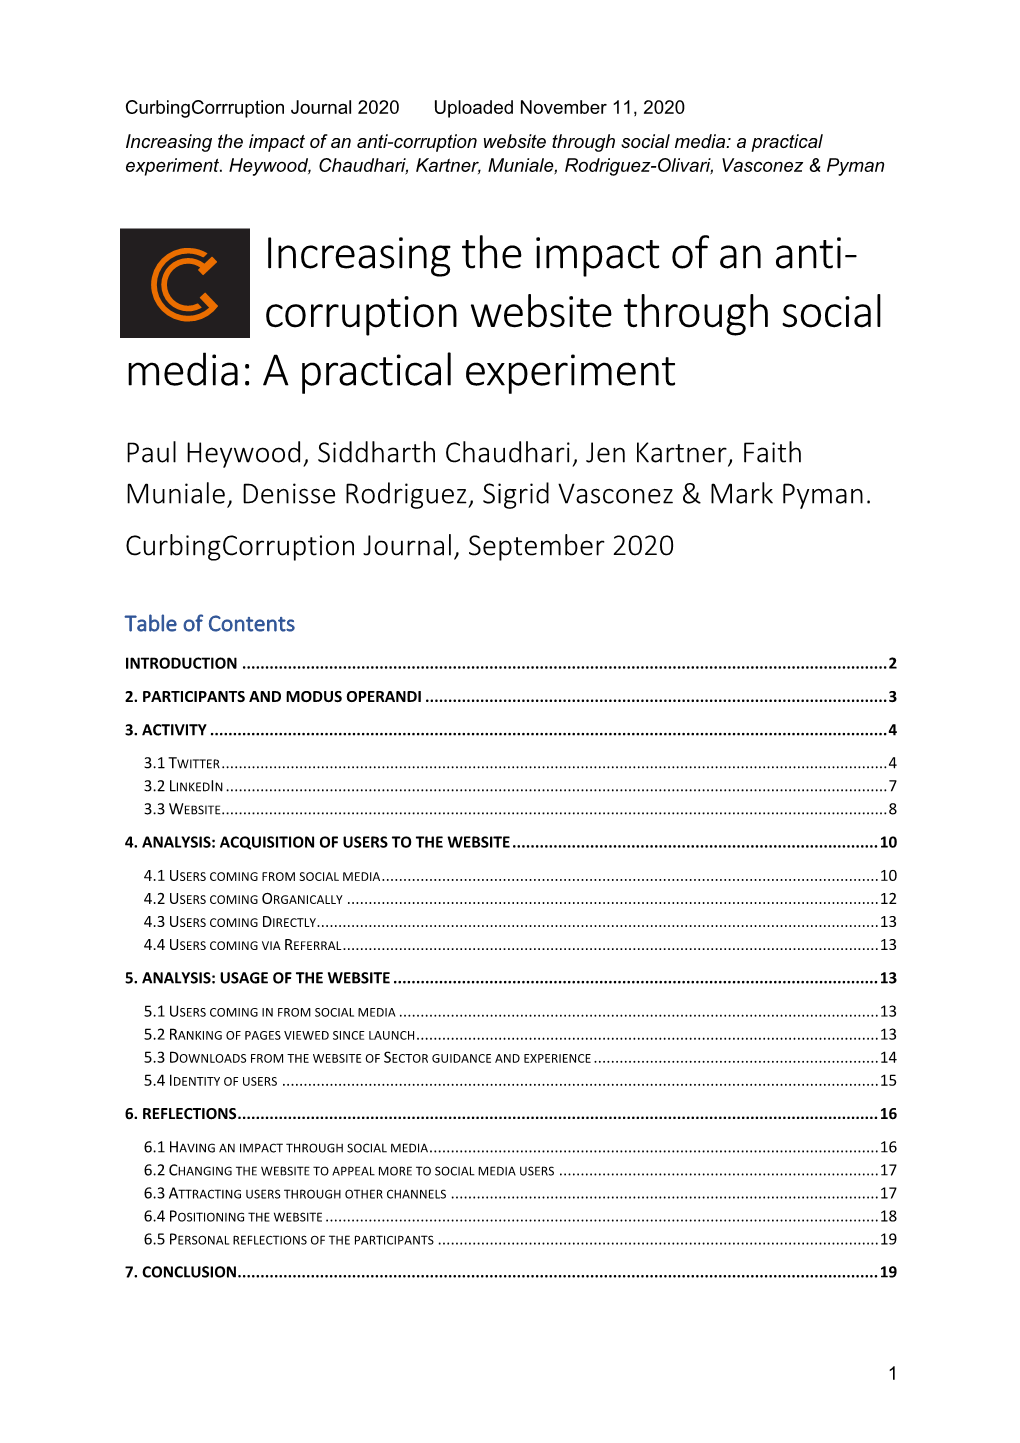 Increasing the Impact of an Anti- Corruption Website Through Social Media: a Practical Experiment